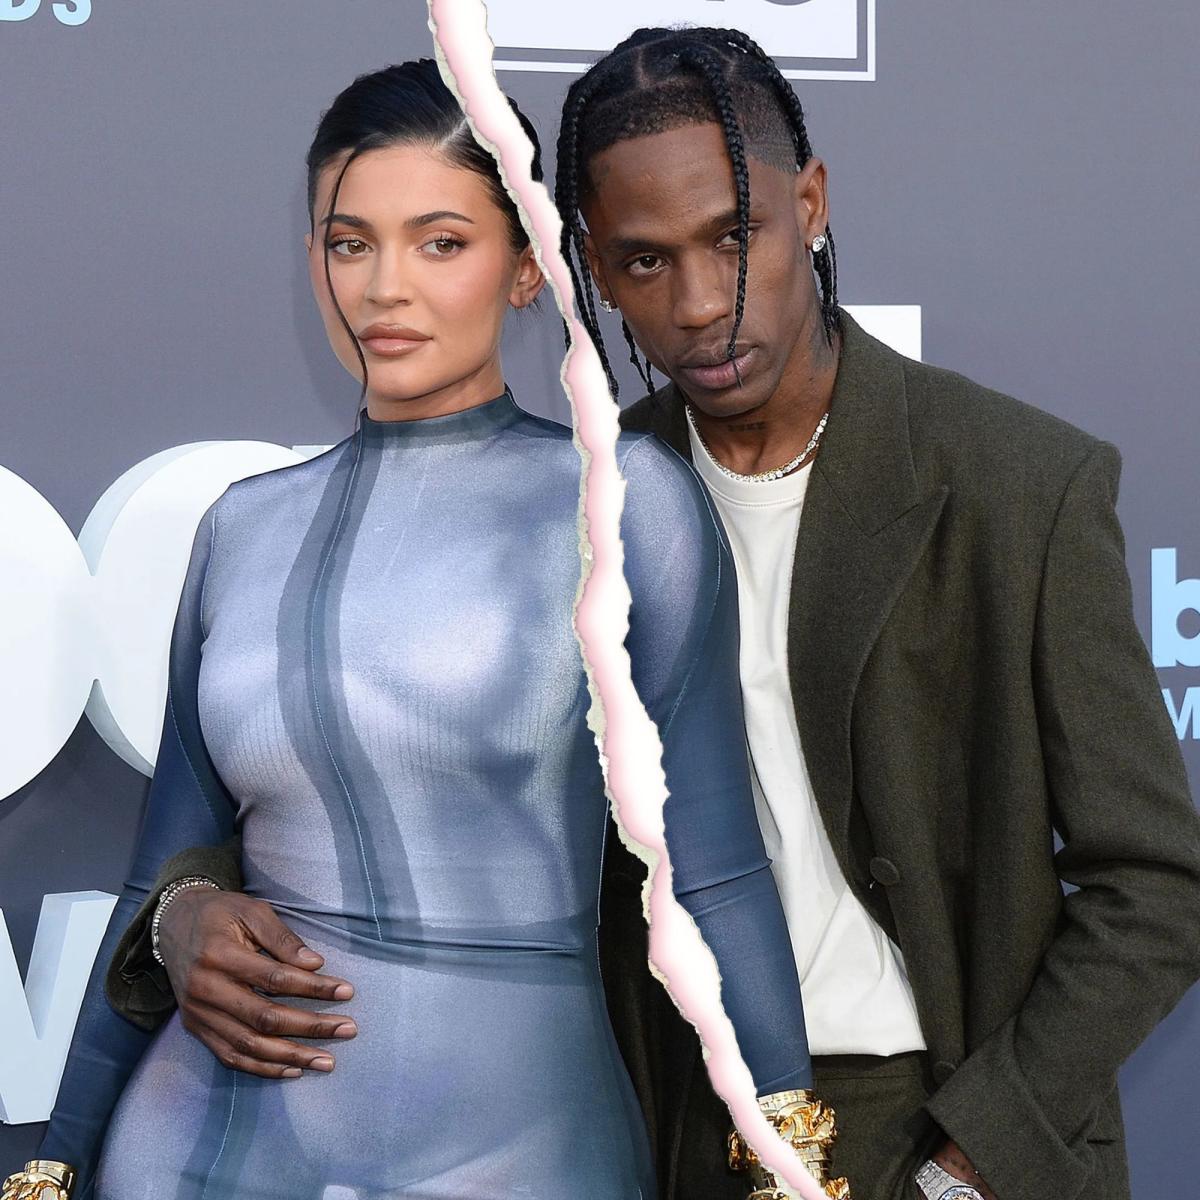 Are Kylie Jenner and Travis Scott Still Together? Their Relationship